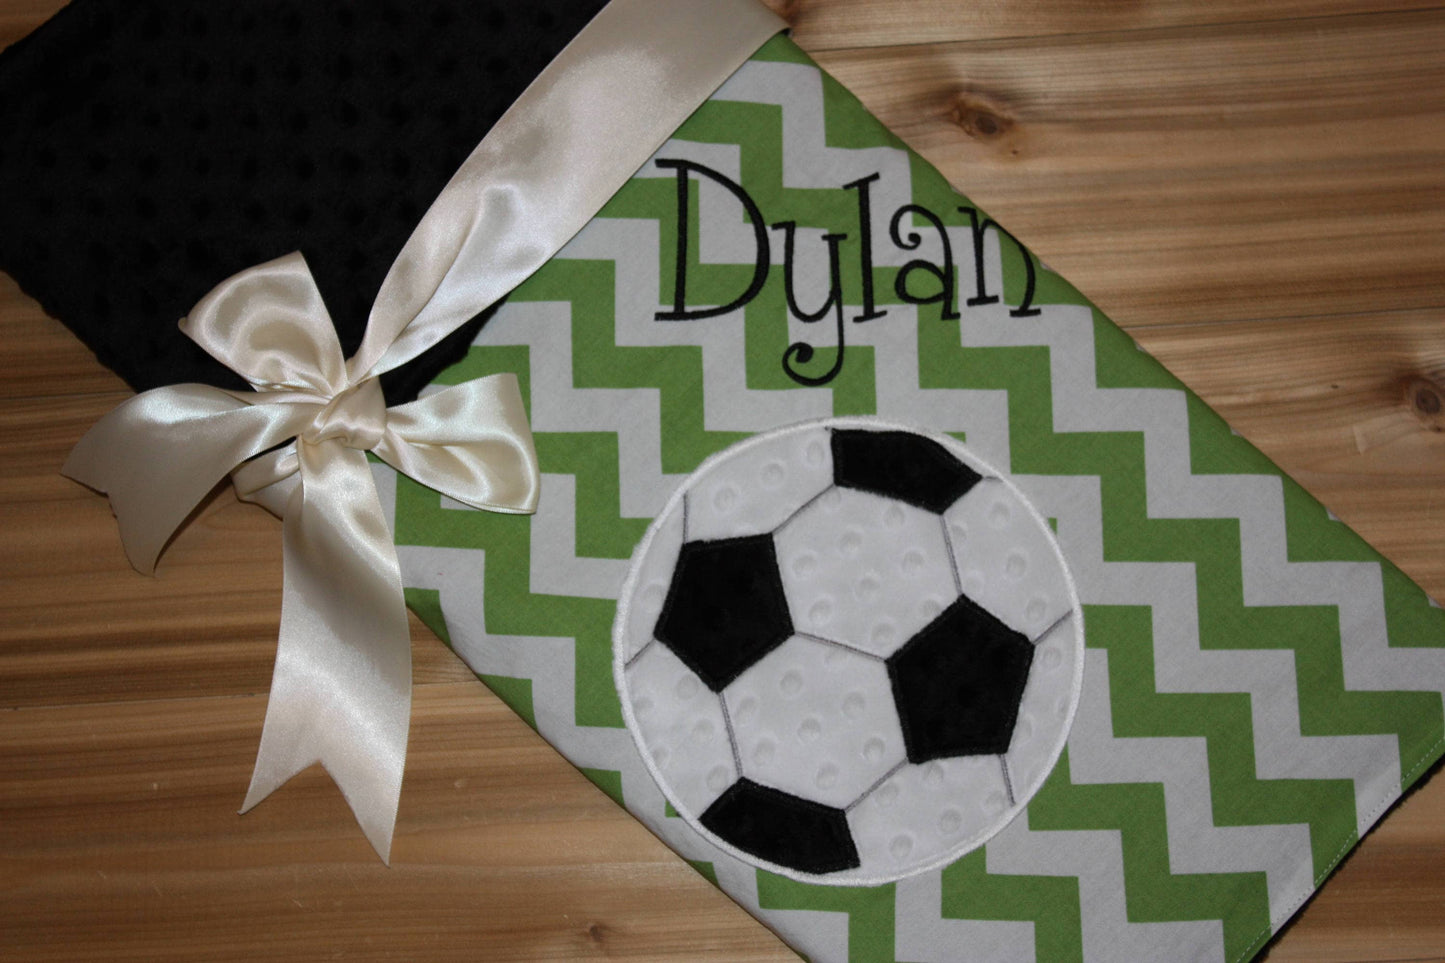 Soccer- Personalized Baby Minky Blanket and Bib & Burp Cloth